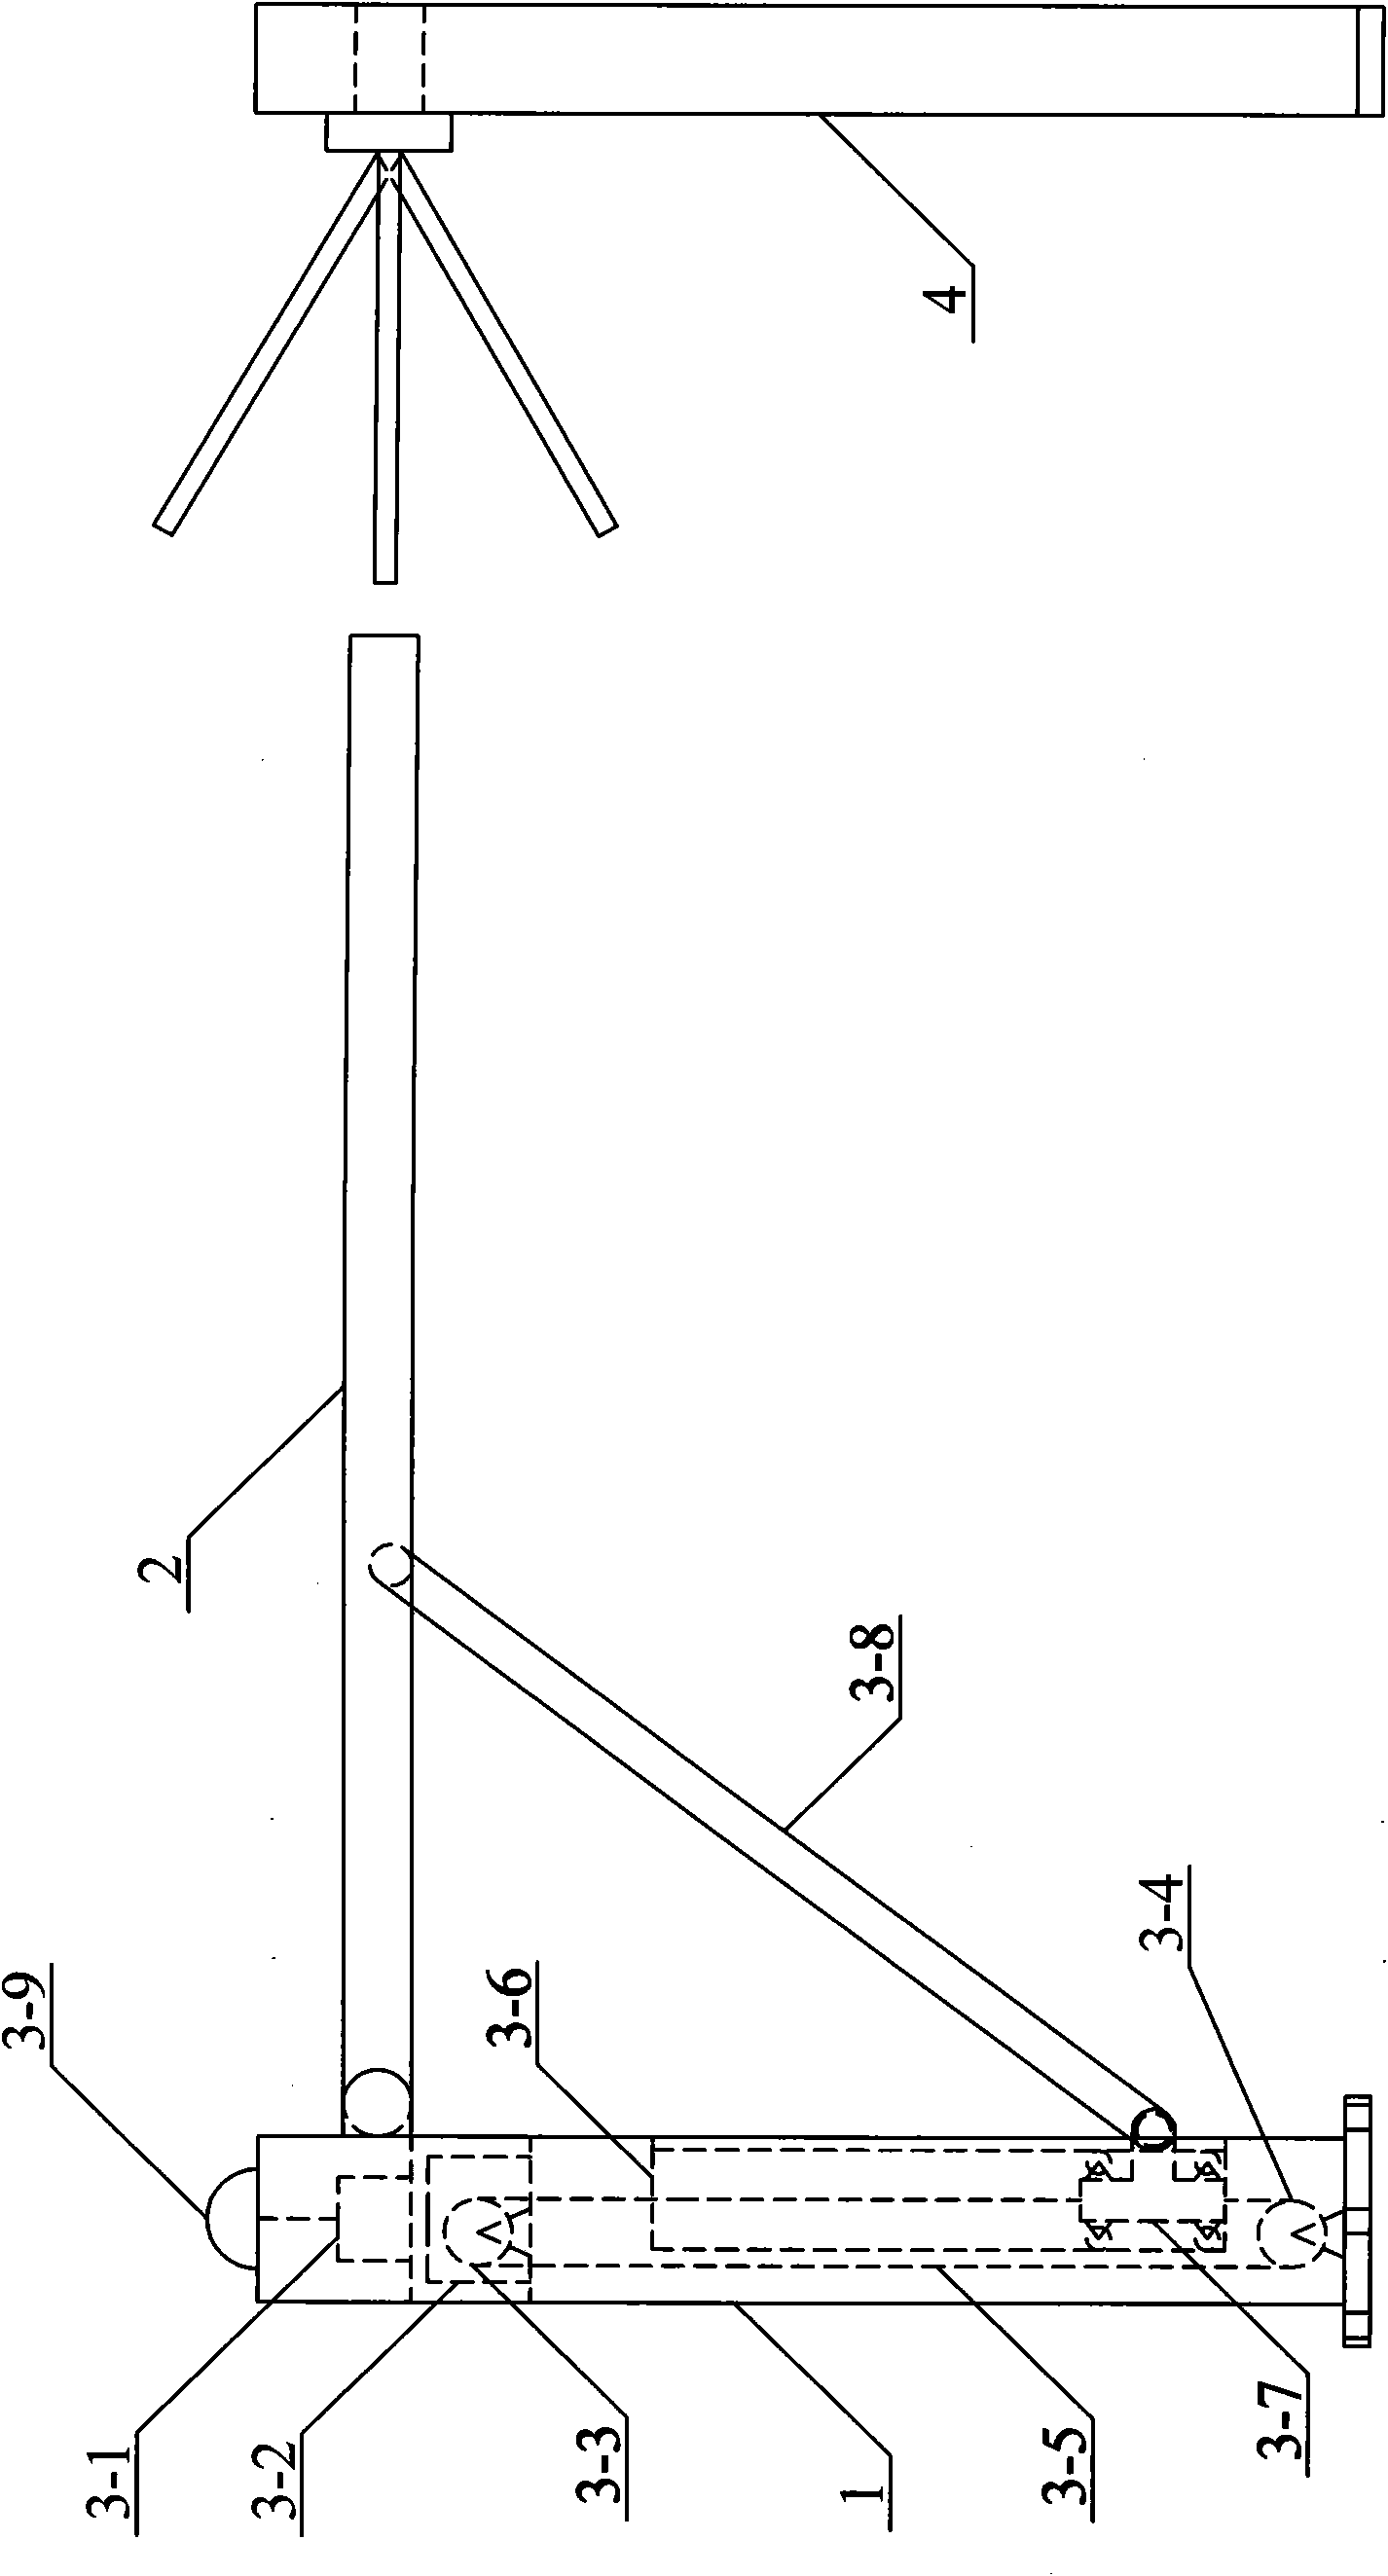 Road section sidewalk guardrail based on inductive control